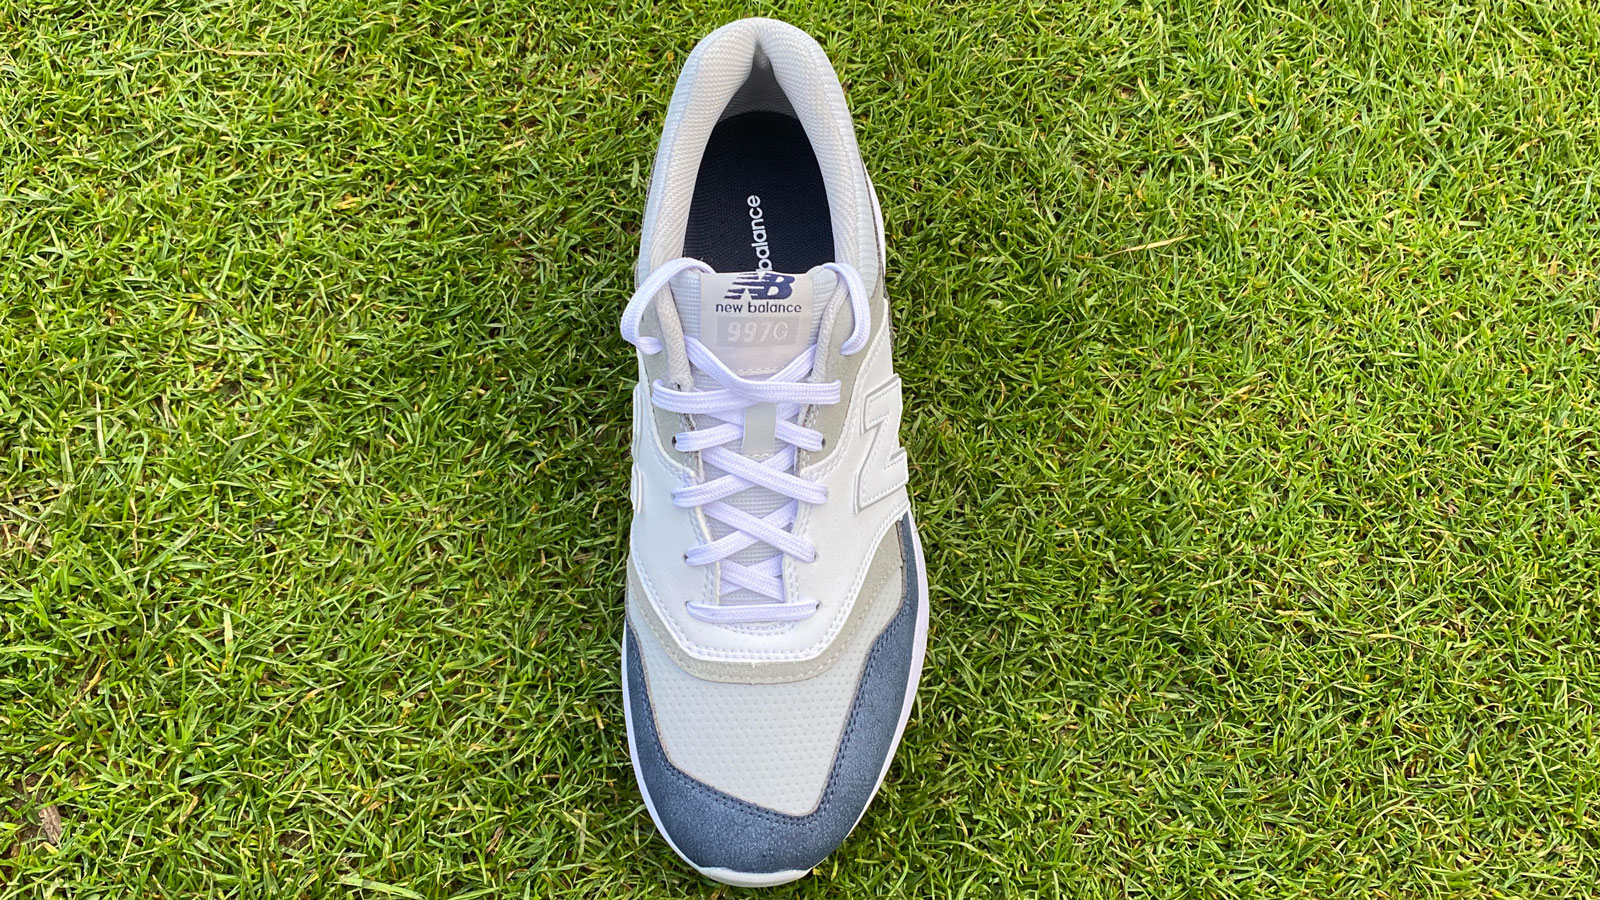 The New Balance 997 SL Golf Shoe from above